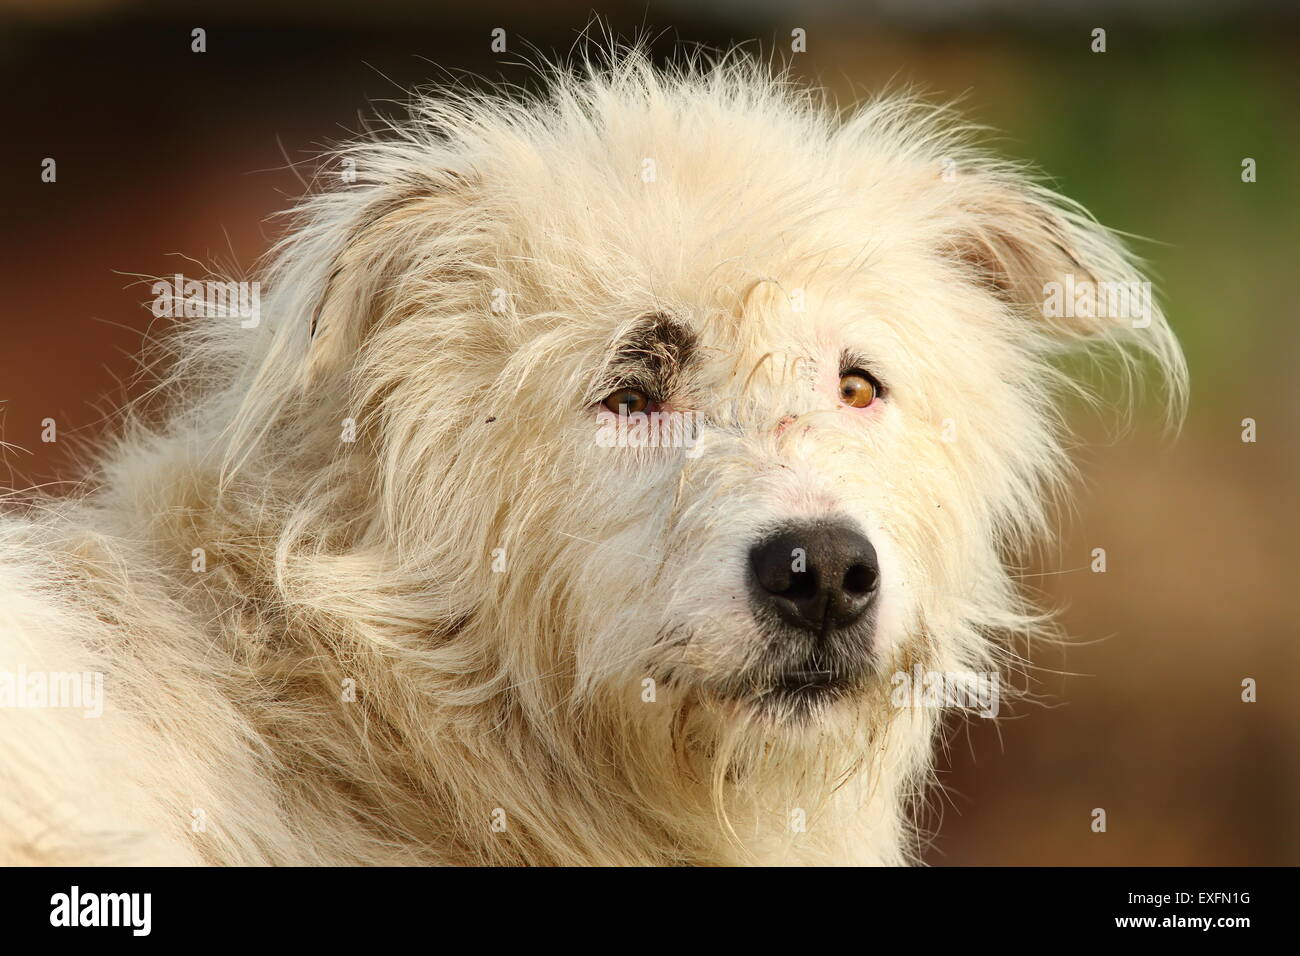 portrait of white romanian shepherd dog over out of focus background Stock Photo